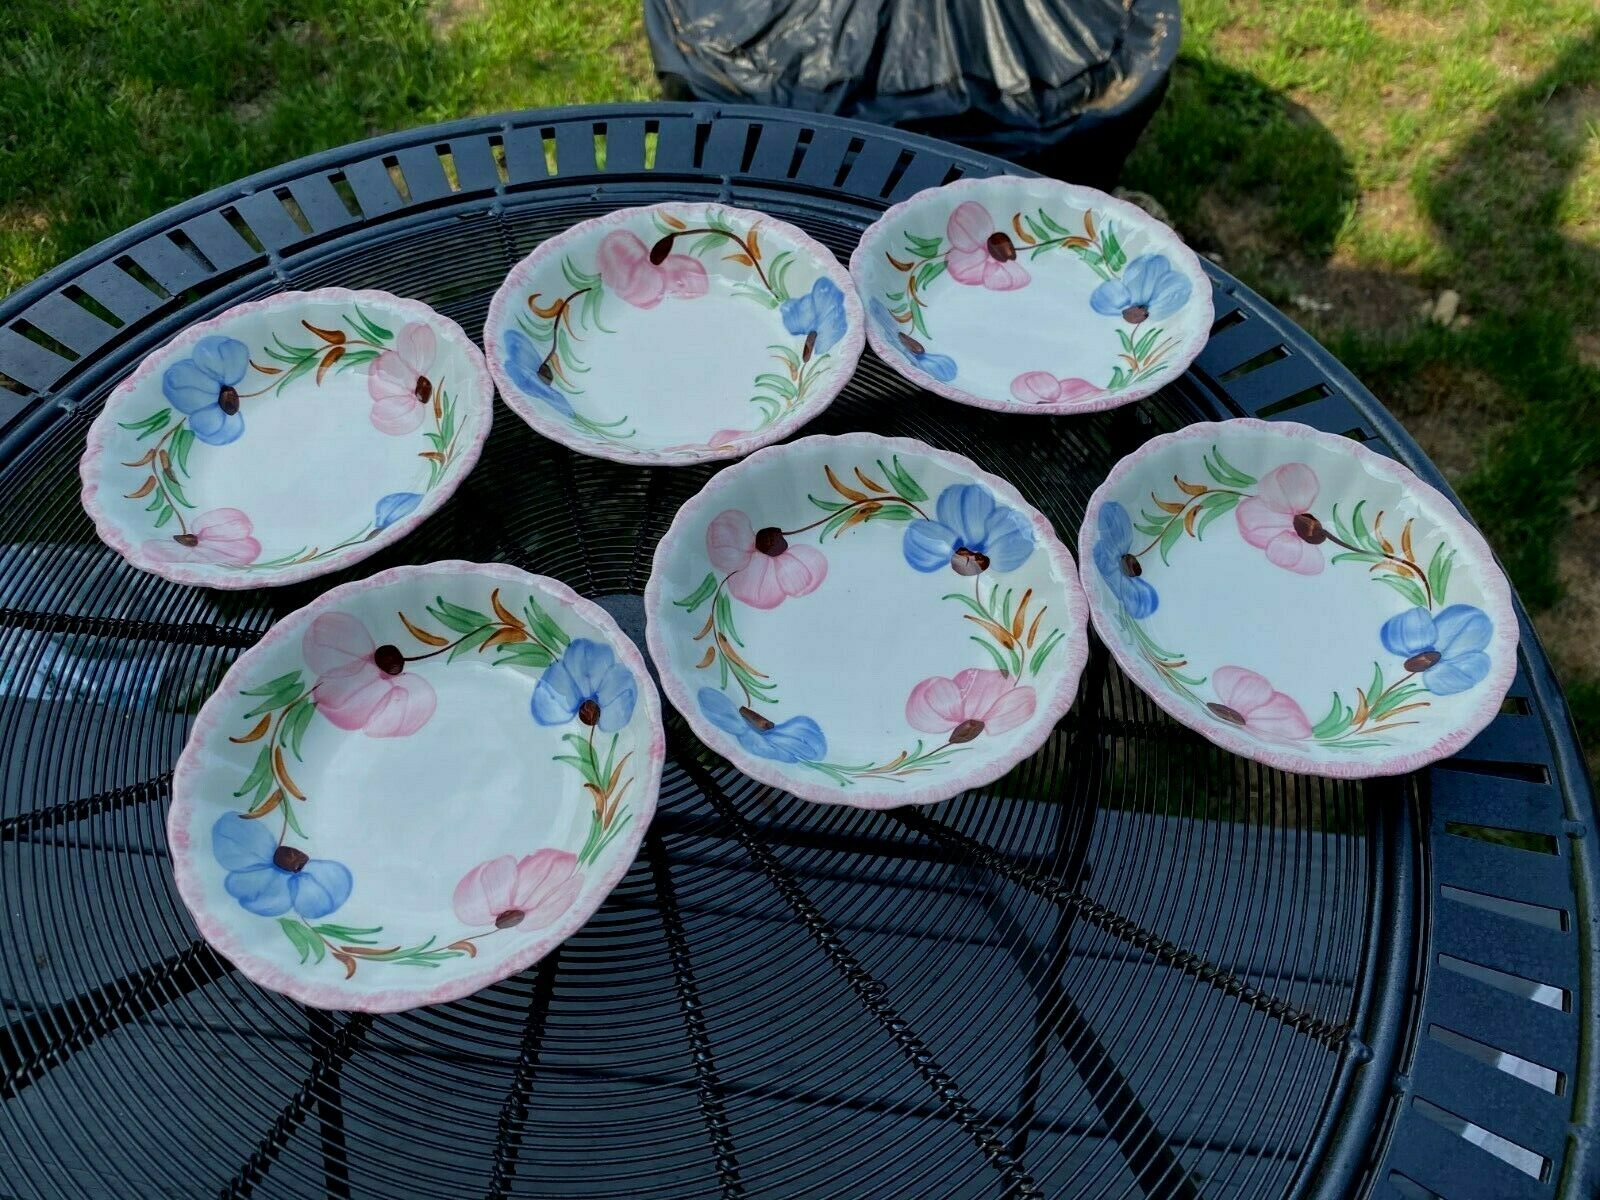 6 Berry Bowls In Sweet Pea By Blue Ridge Southern Pottery Excellent Condition !